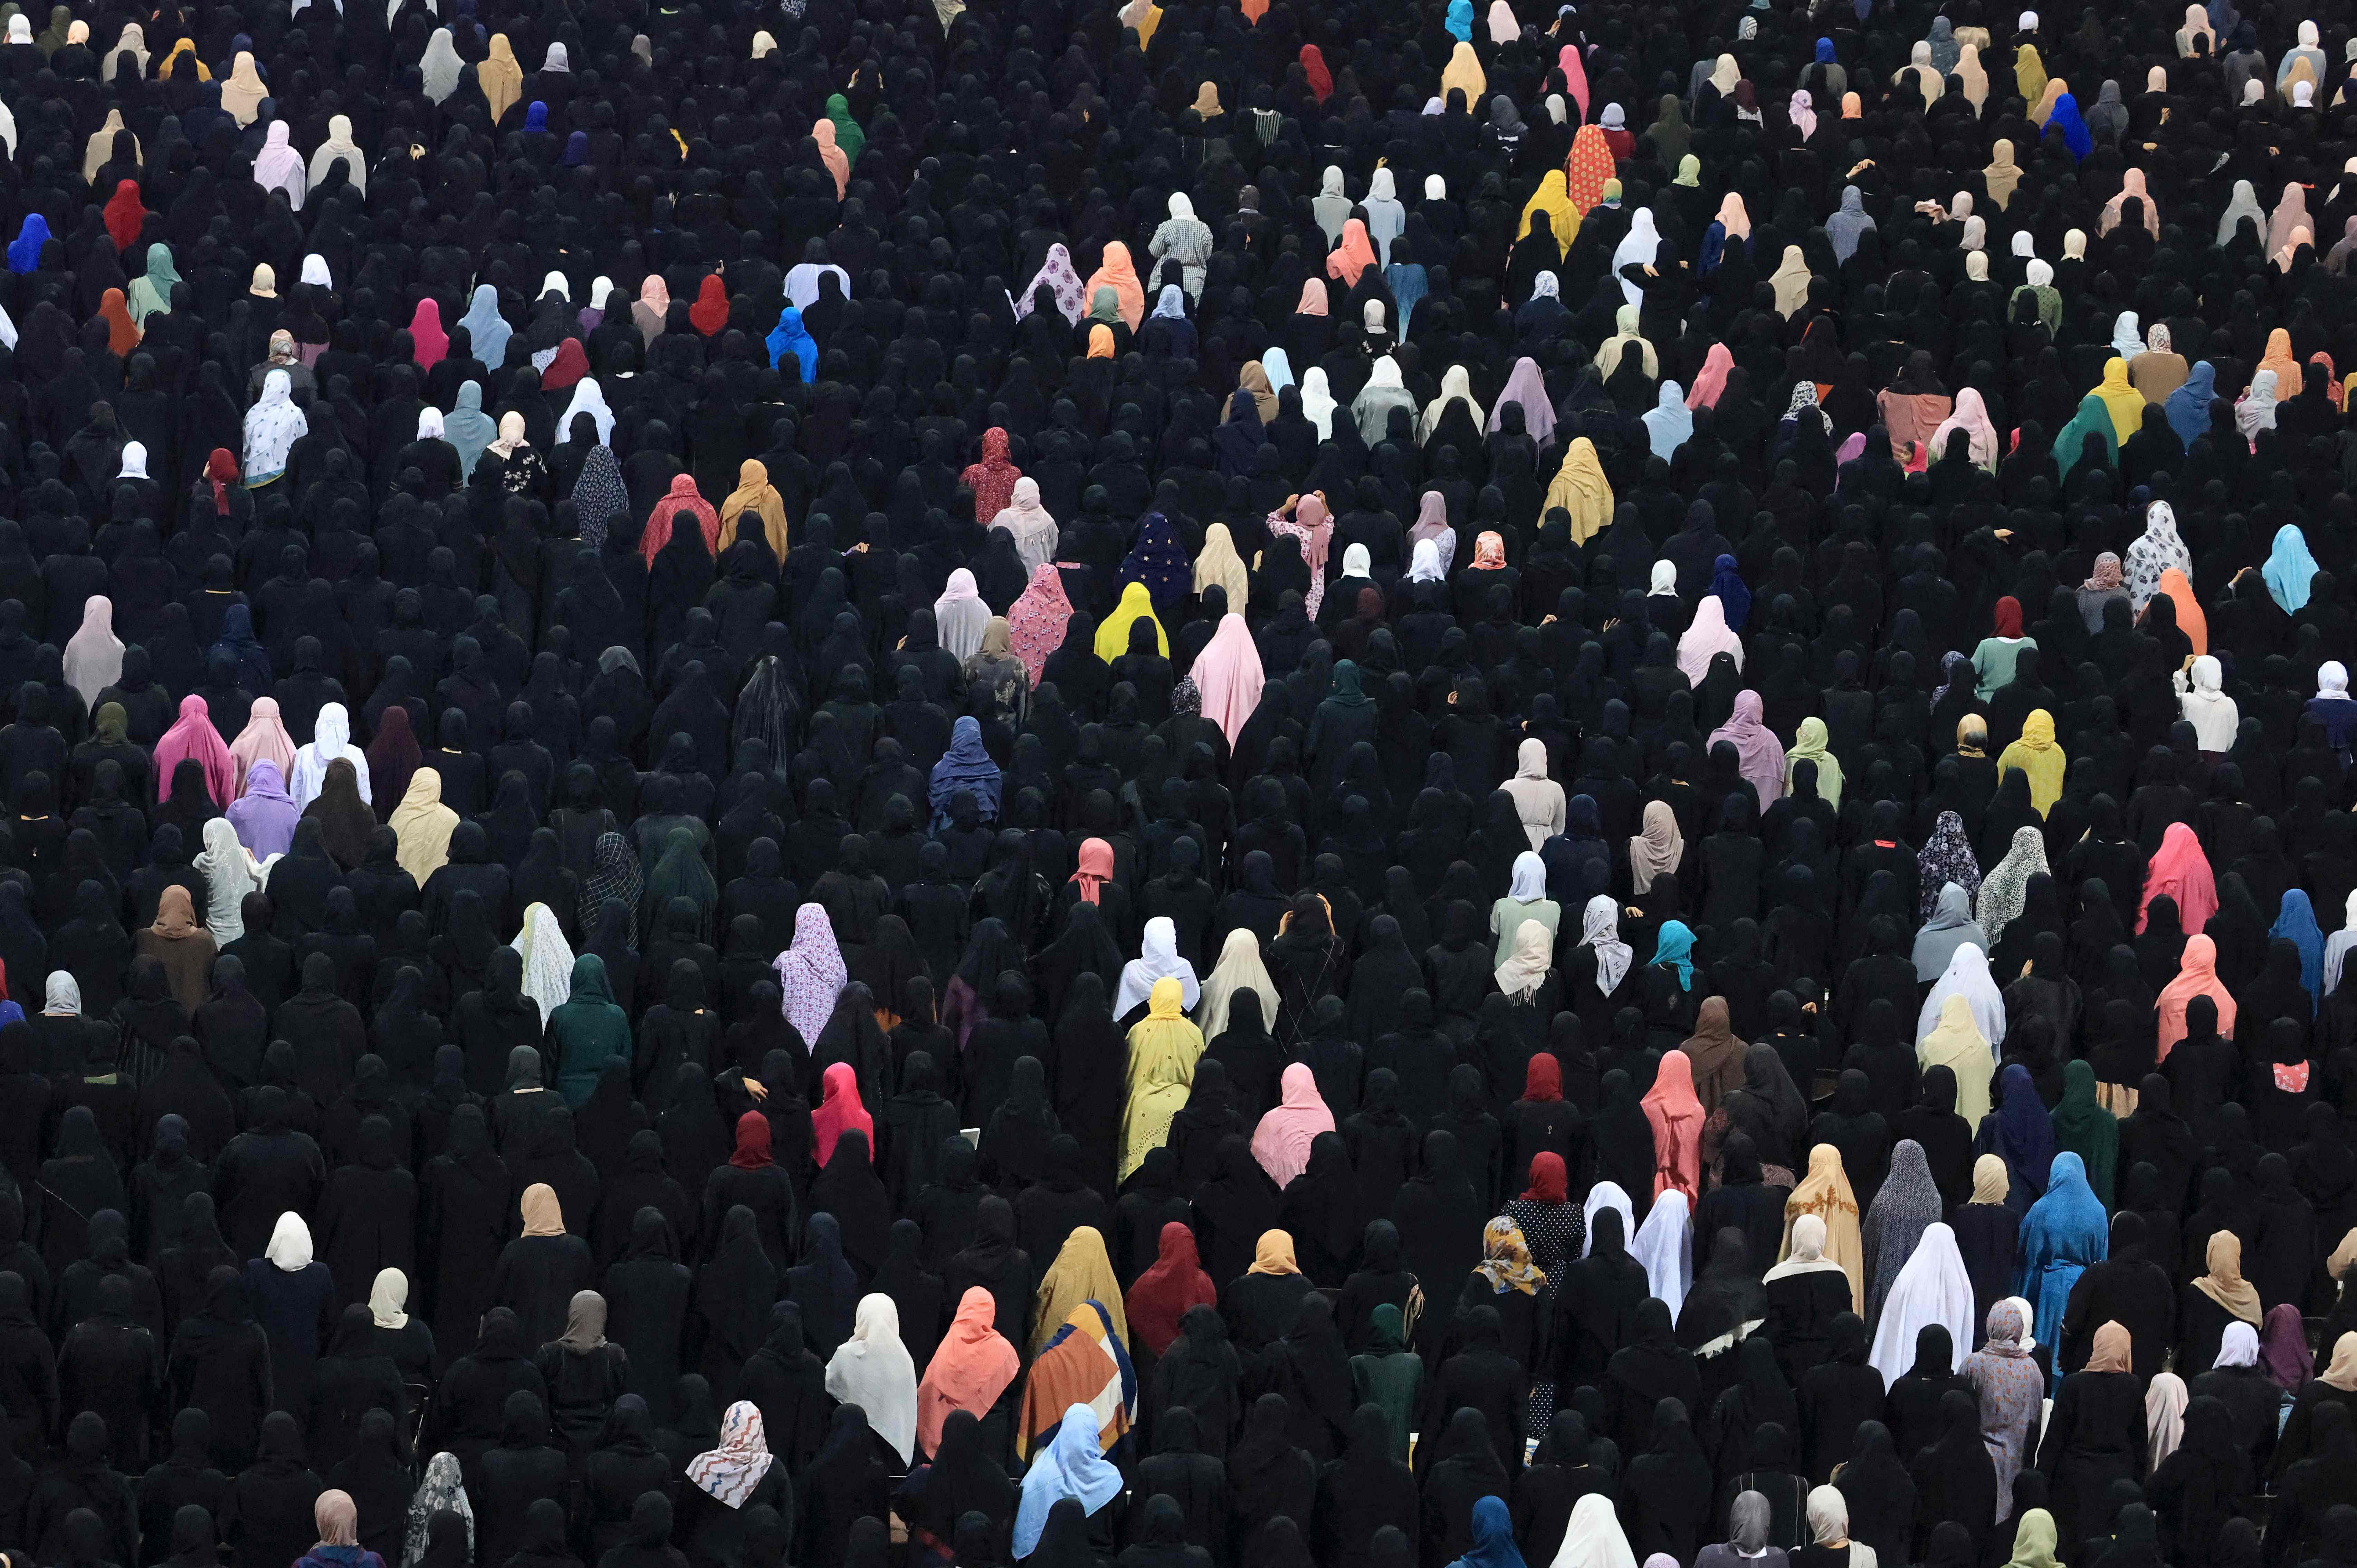 Muslim women pray at the Sheikh Zayed Grand Mosque in Abu Dhabi. Credit: AFP Photo